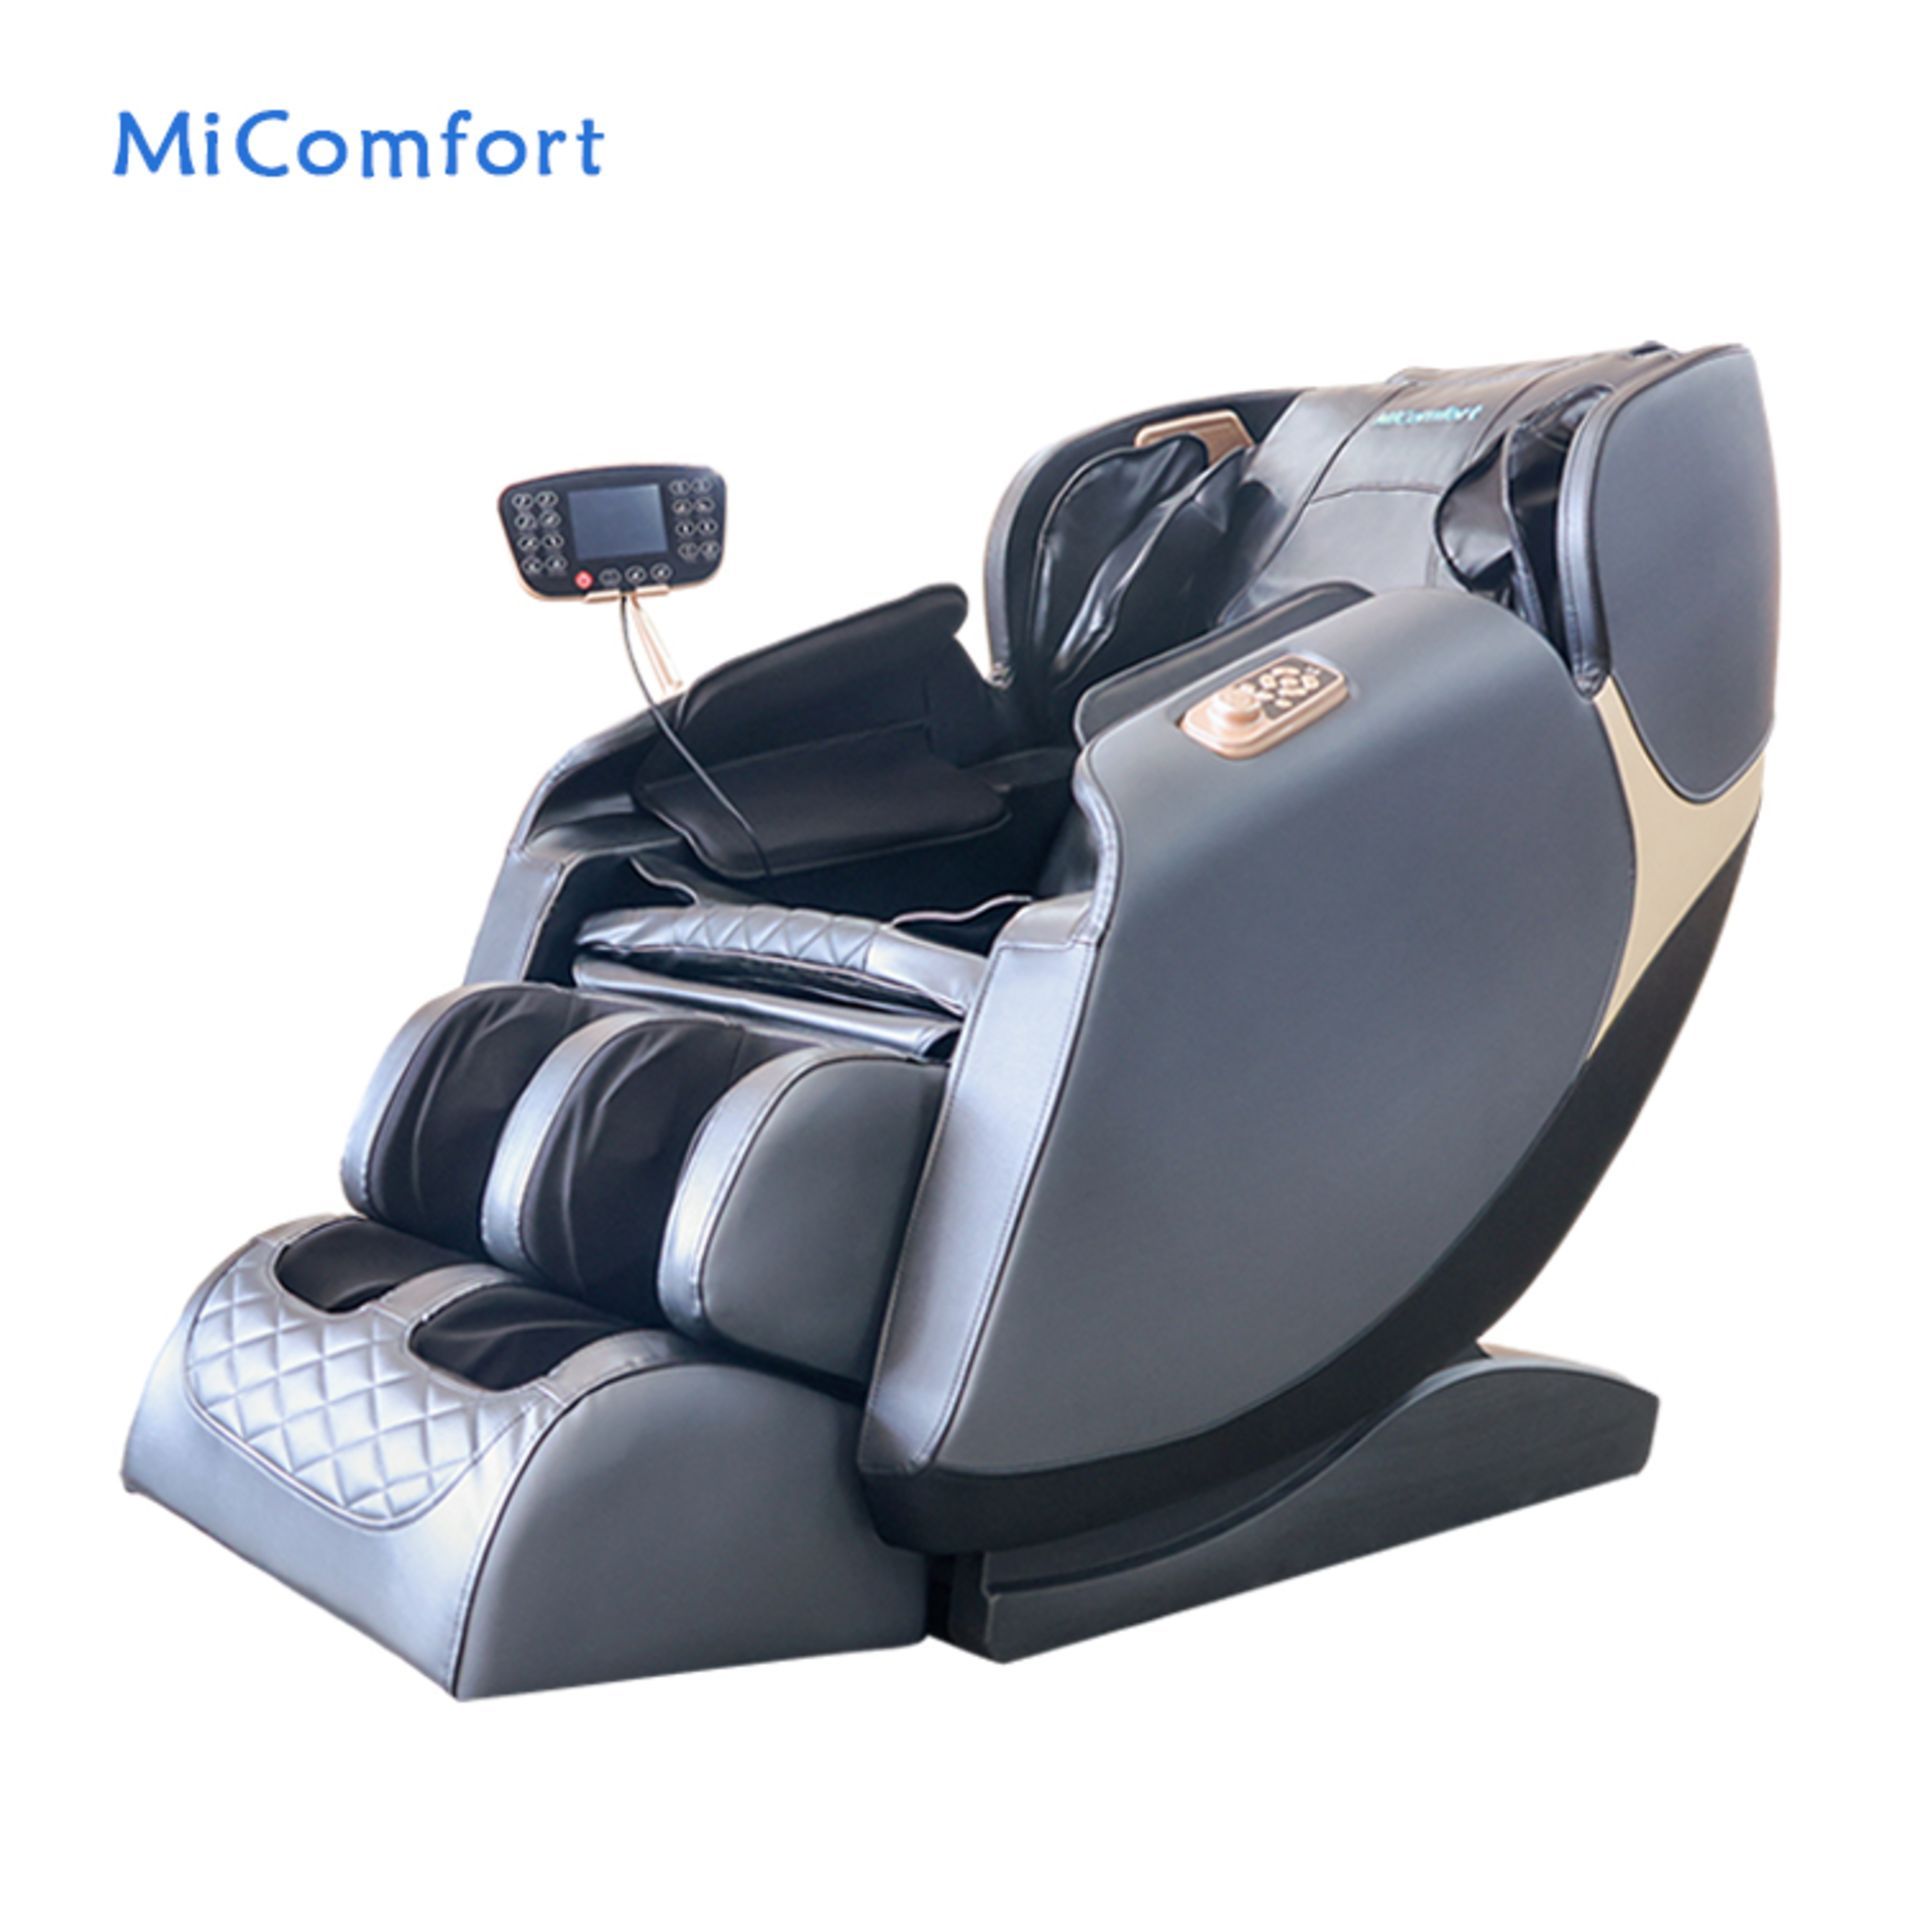 Brand New in Box Orchid Blue/Black MiComfort Full Body Massage Chair RRP £2199 *NO VAT* - Image 2 of 14